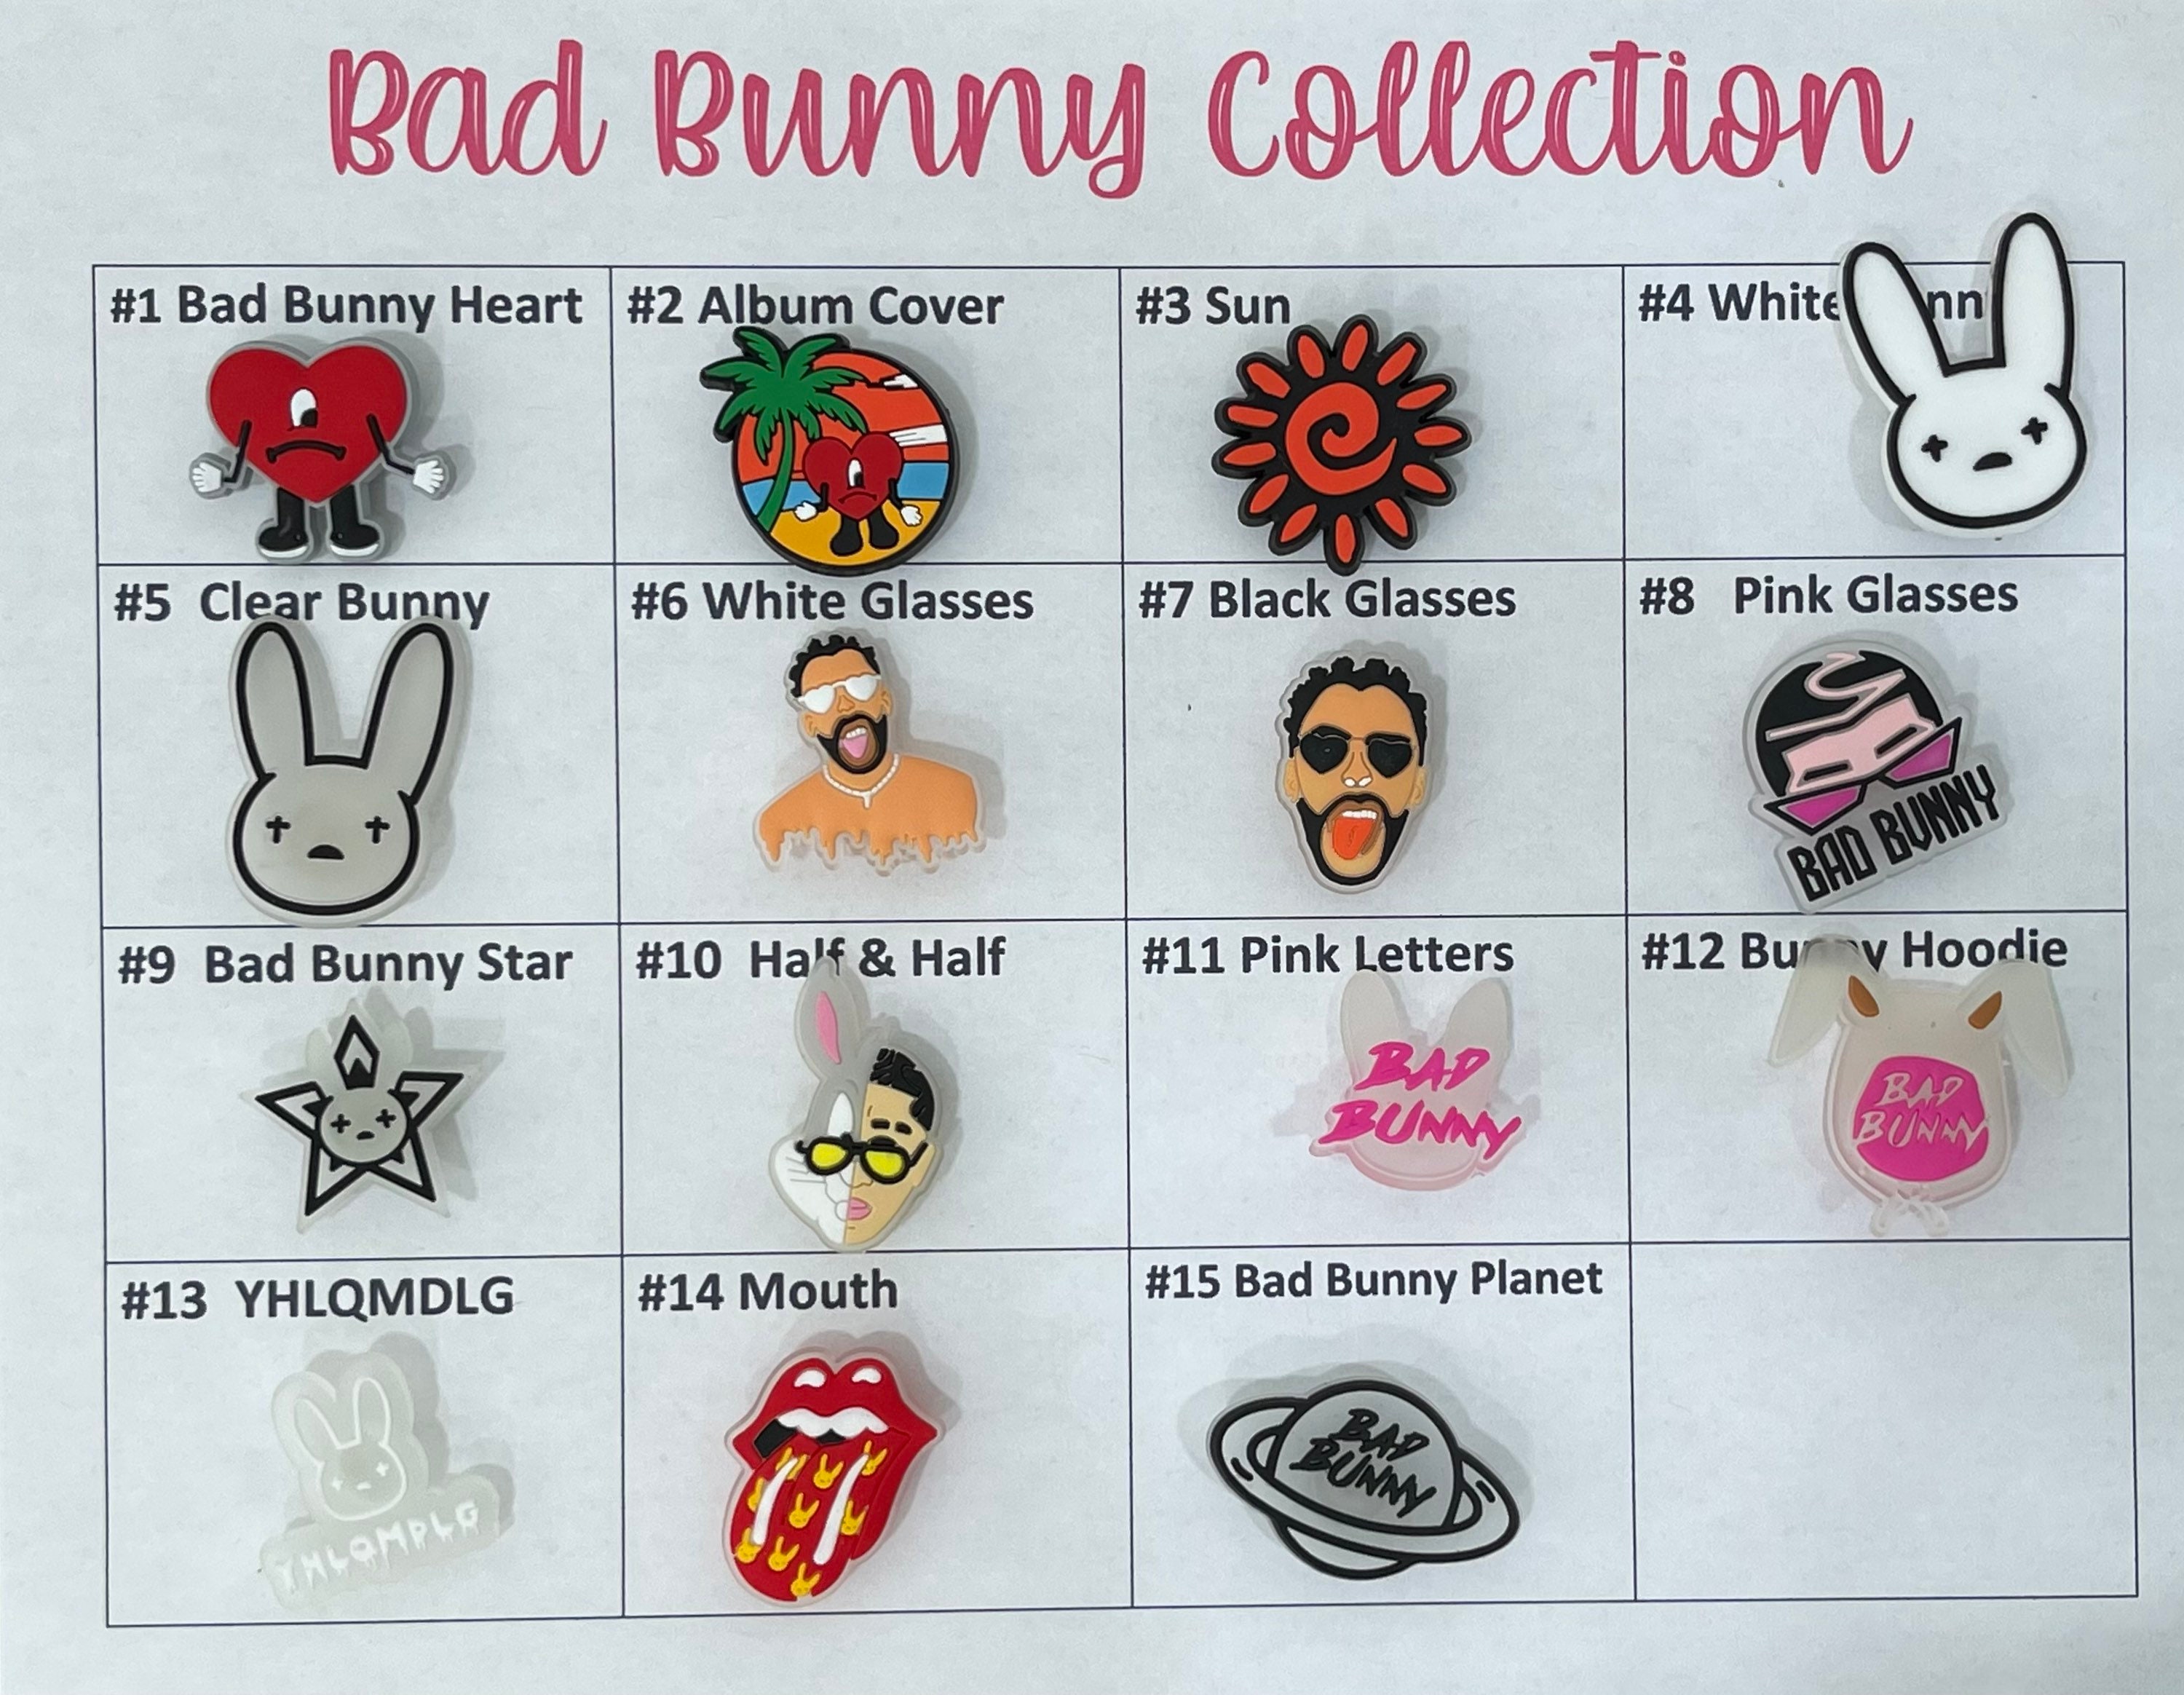 bad bunny 6 croc charms *mystery pack*